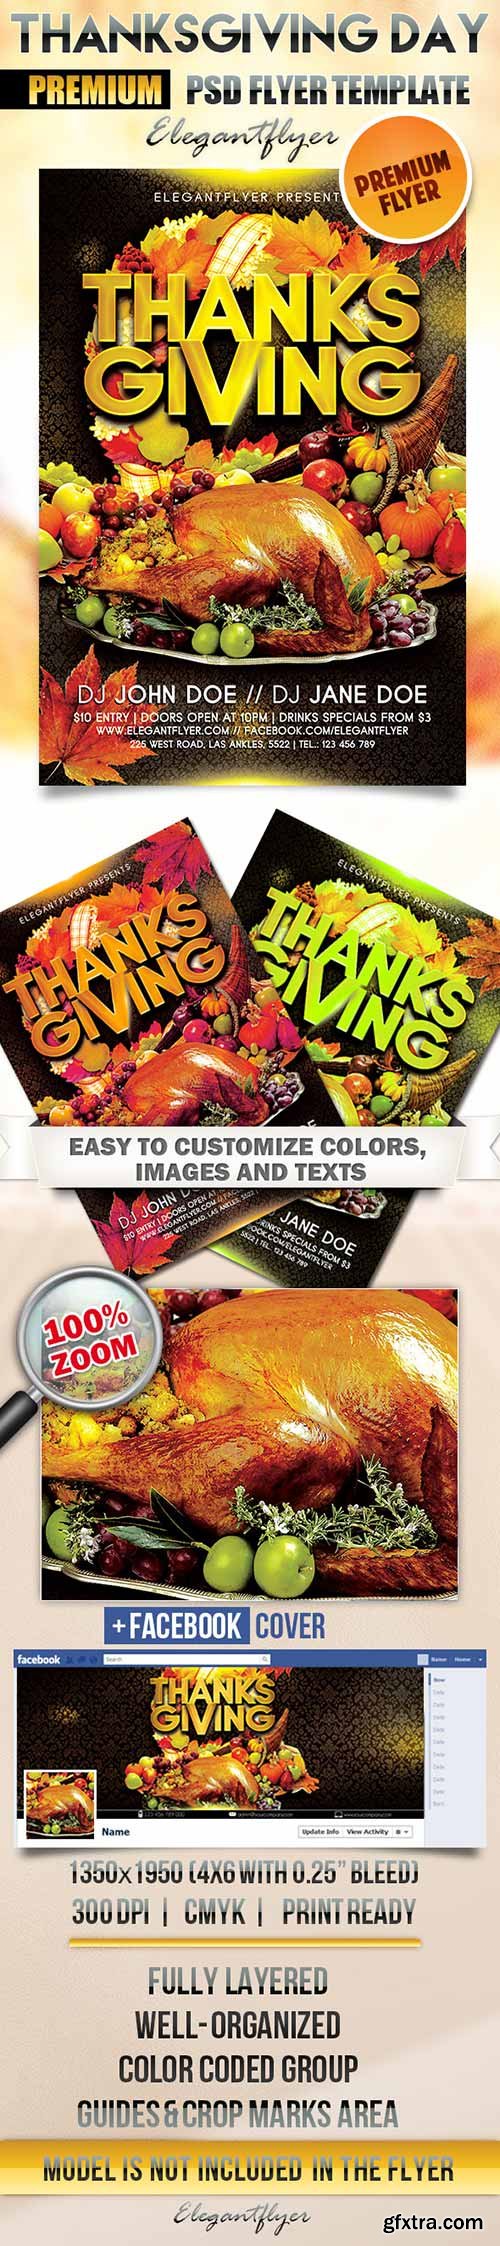 Thanksgiving Day Flyer PSD Template + Facebook Cover